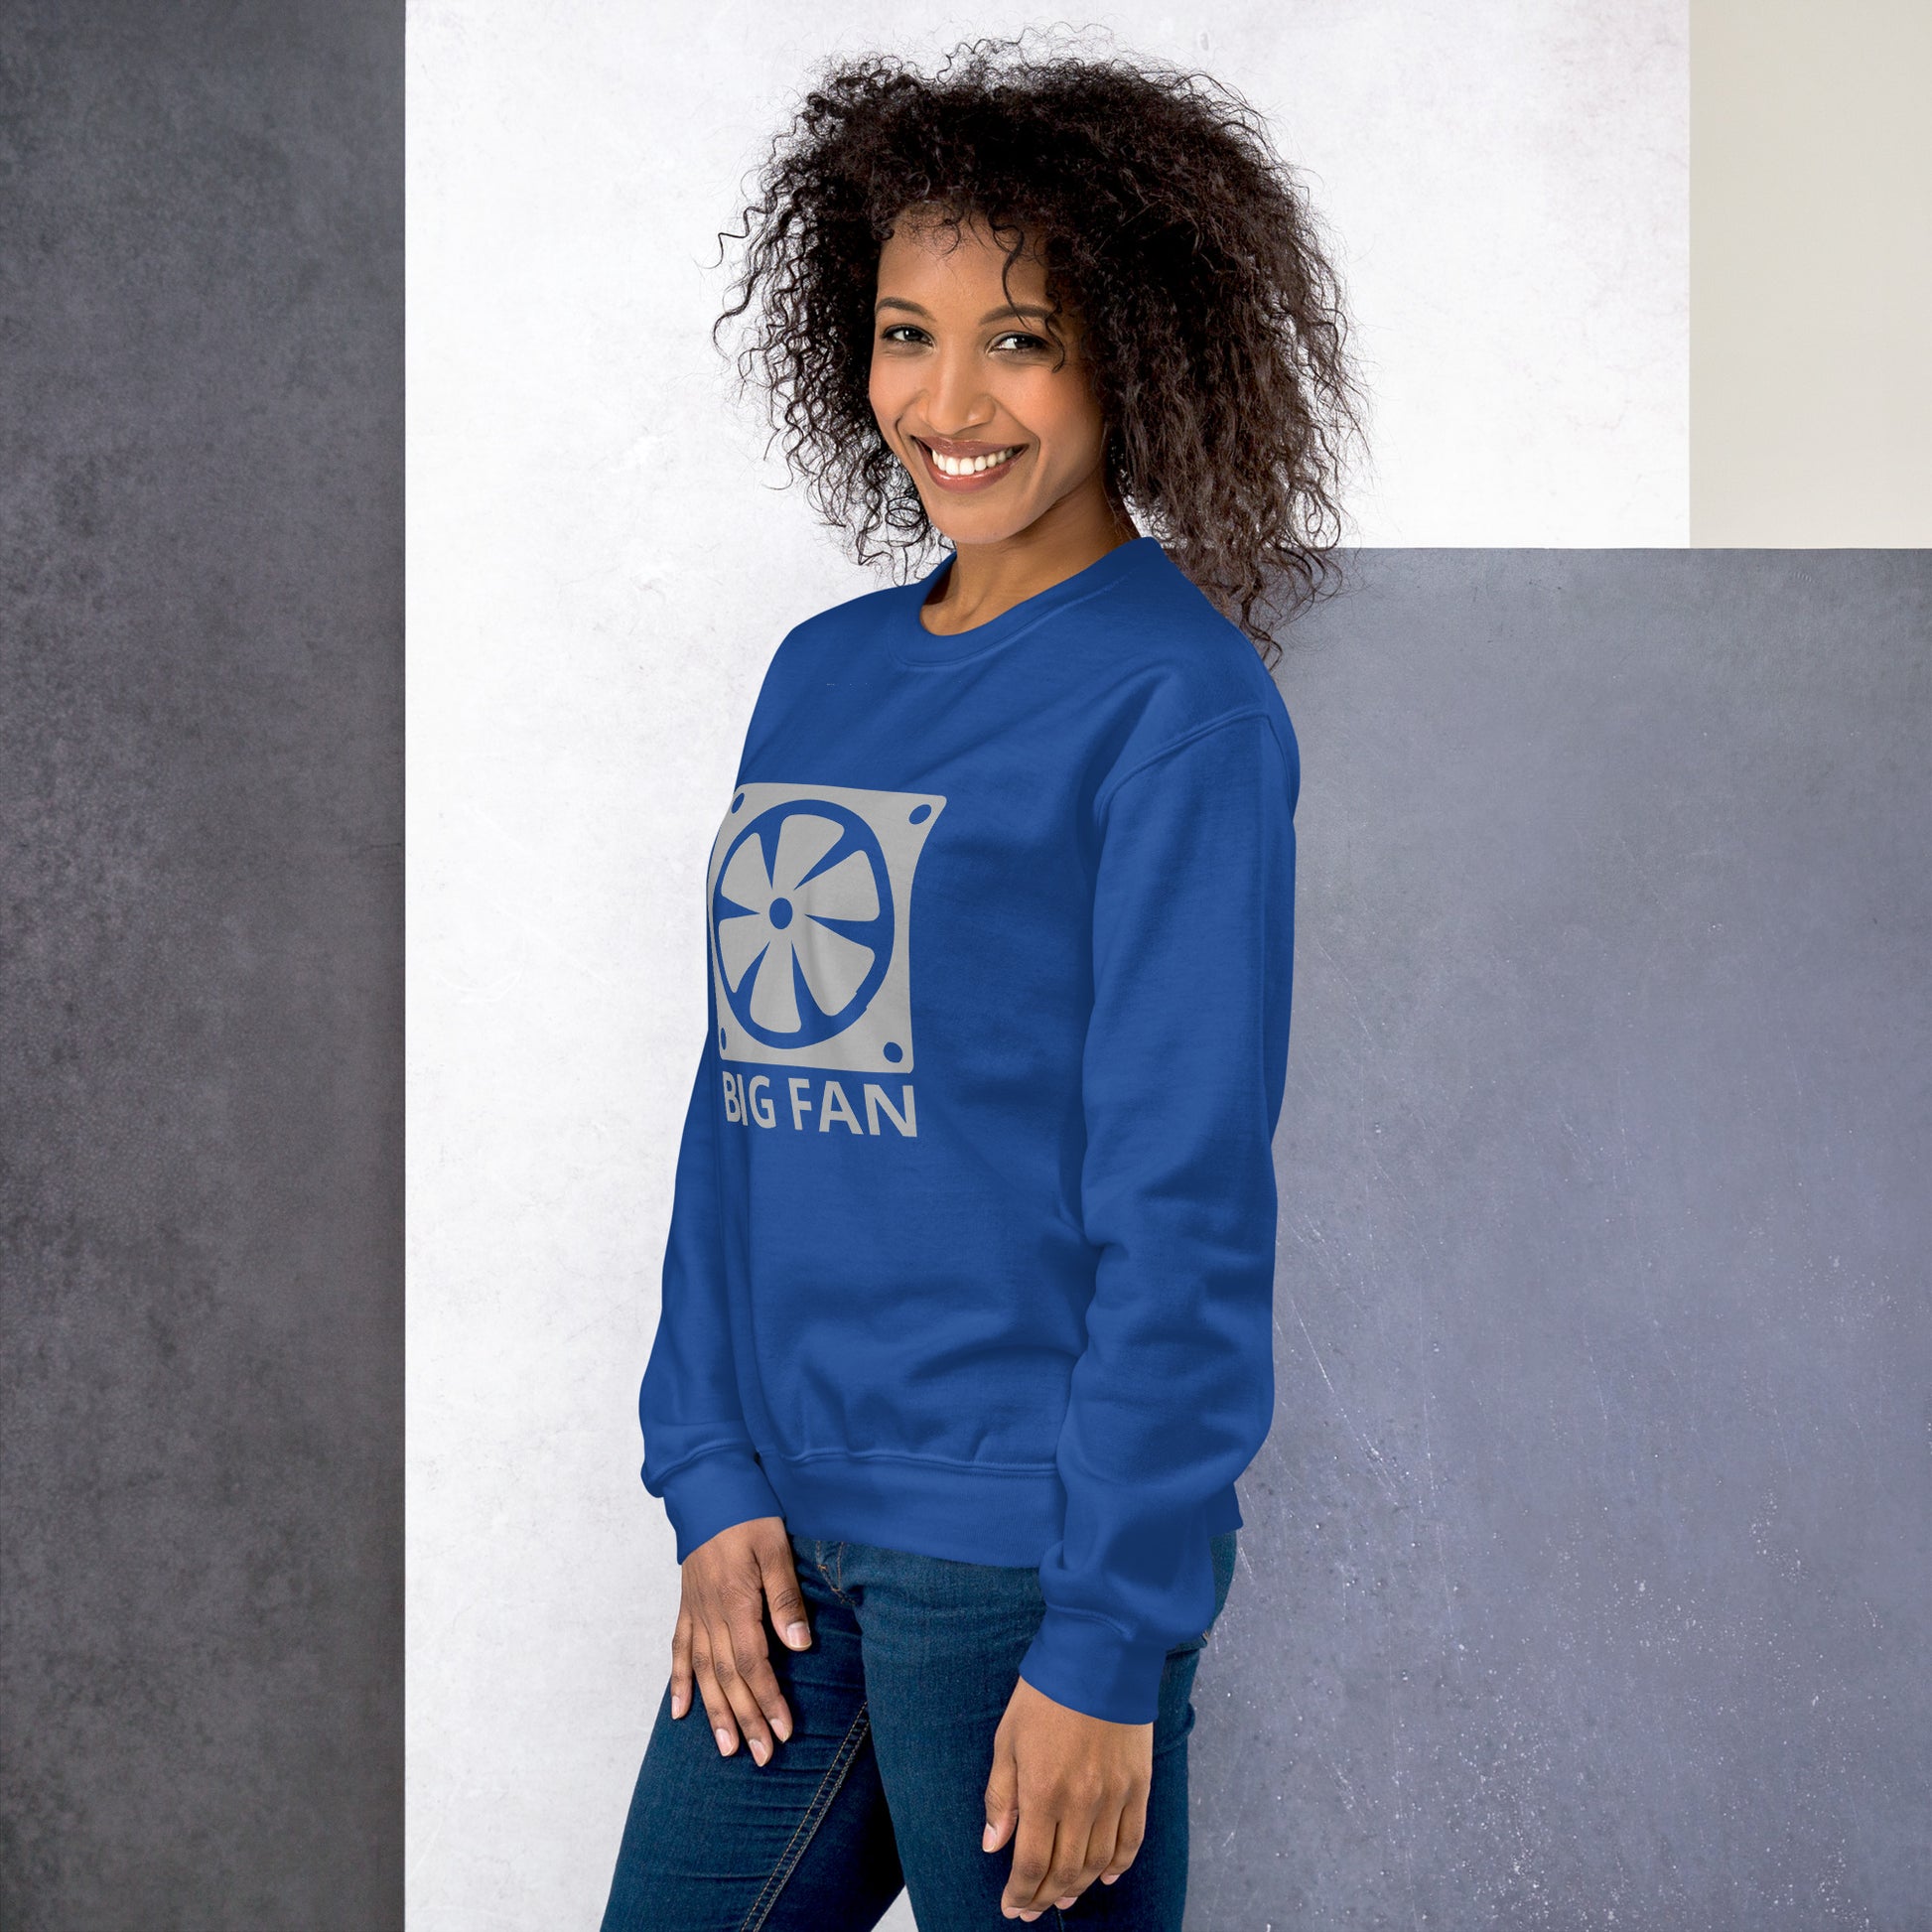 Women with royal blue sweatshirt with image of a big computer fan and the text "BIG FAN"